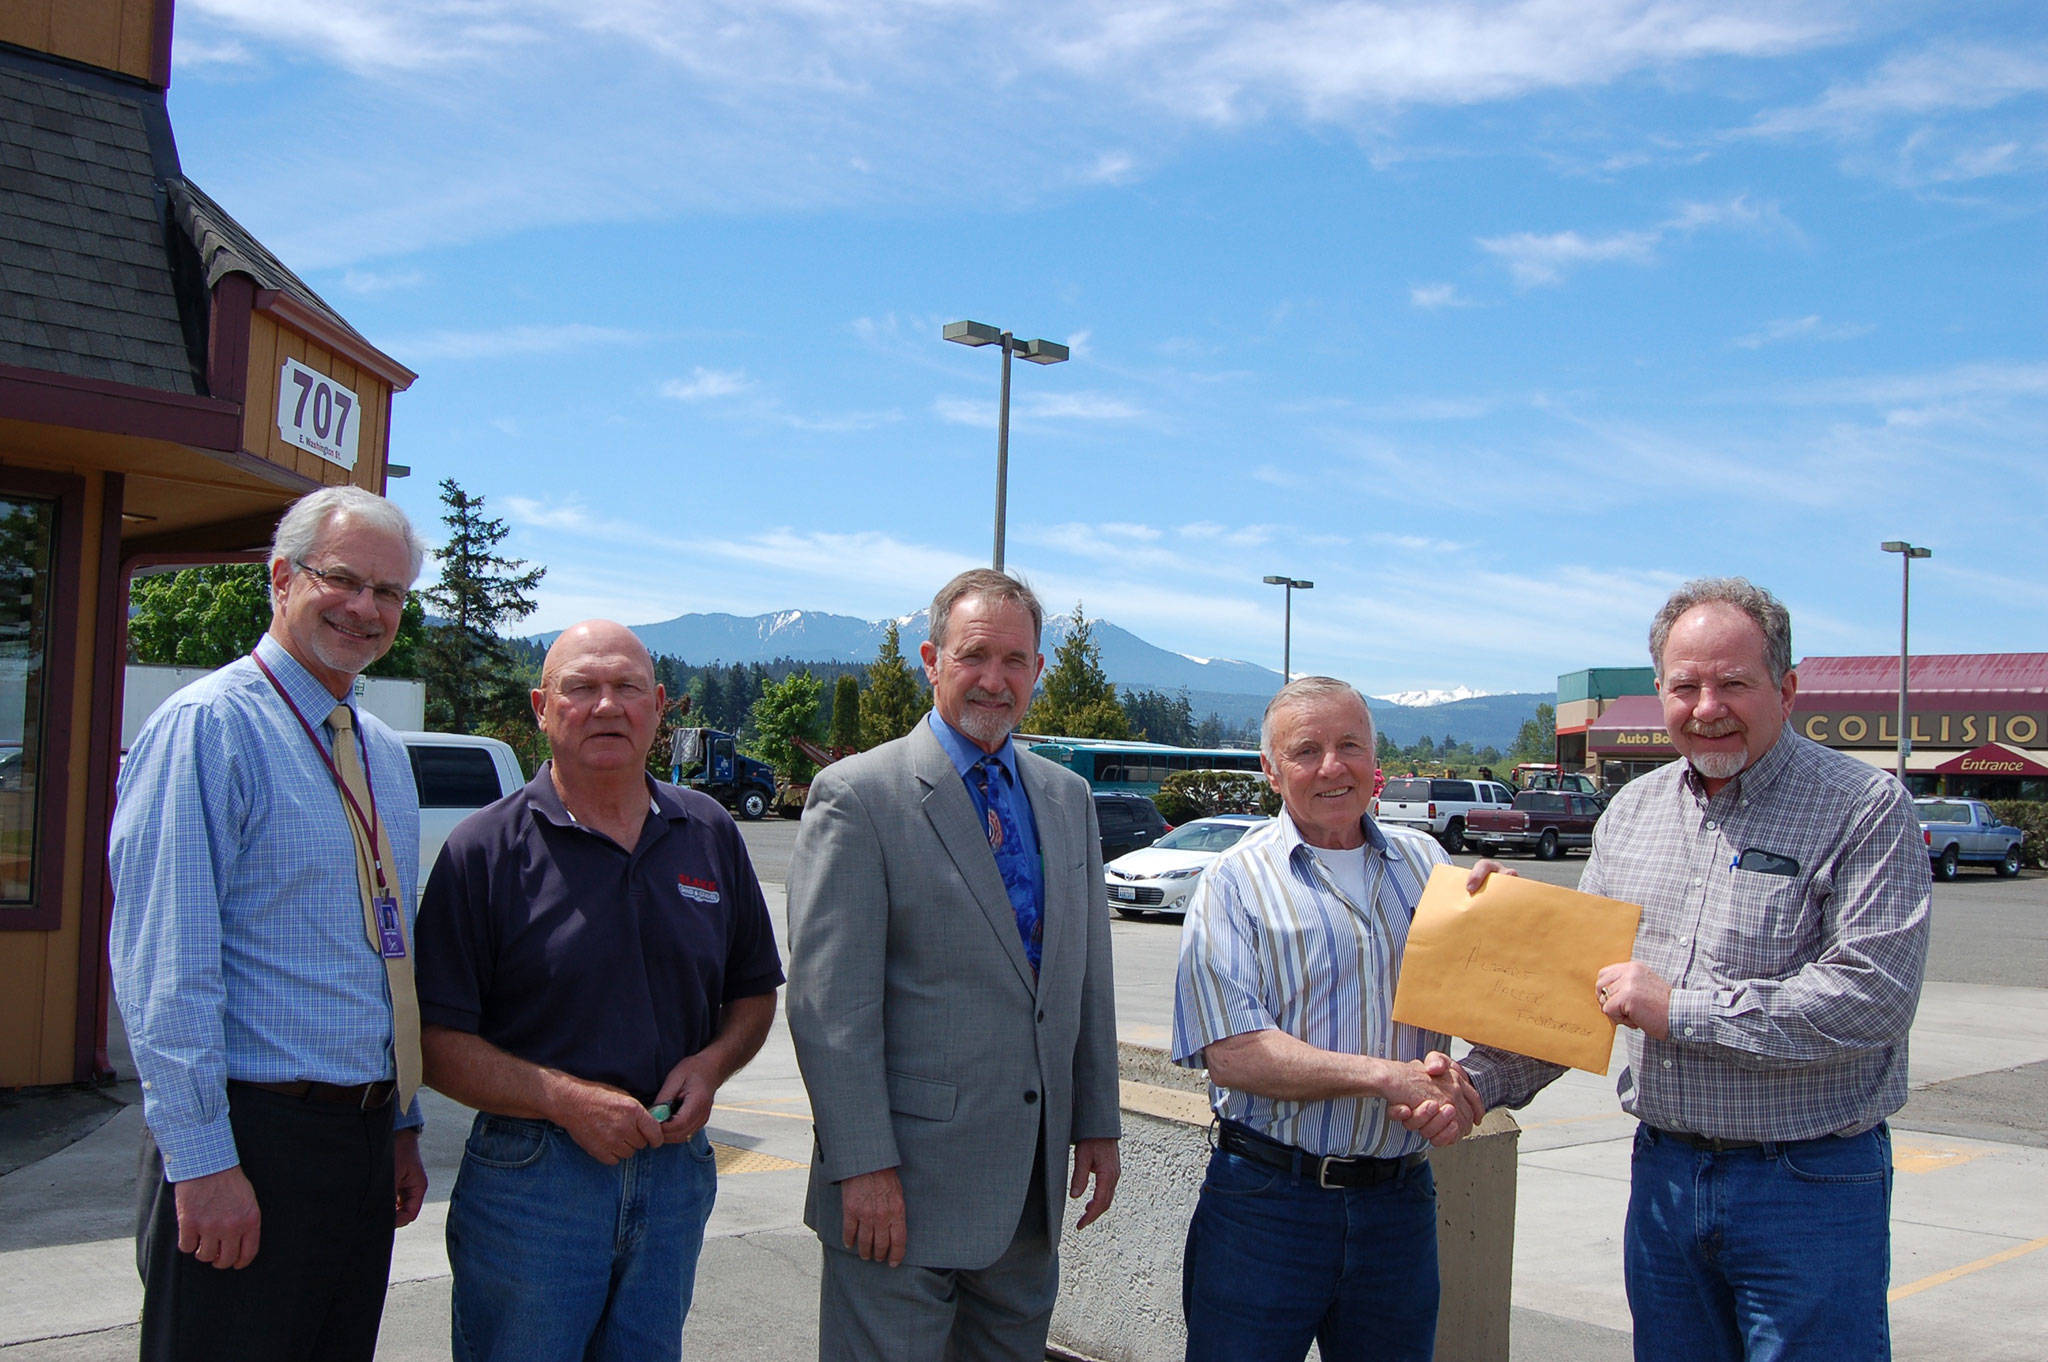 Sequim School District Superintendent and Albert Haller Foundation board member Gary Neal, left, stands with foundation secretary/treasurer Dave Blake, foundation board member and Port Angeles School District Superintendent Marc Jackson, foundation president Gary Smith and Lakeside Industries Olympic Peninsula manager Jim Wiedman, from left. Lakeside Industries of Port Angeles is donating $30,000 to the Albert Haller Foundation, a nonprofit dedicated to supporting charitable and community causes in Clallam County. (Erin Hawkins/Olympic Peninsula News Group)